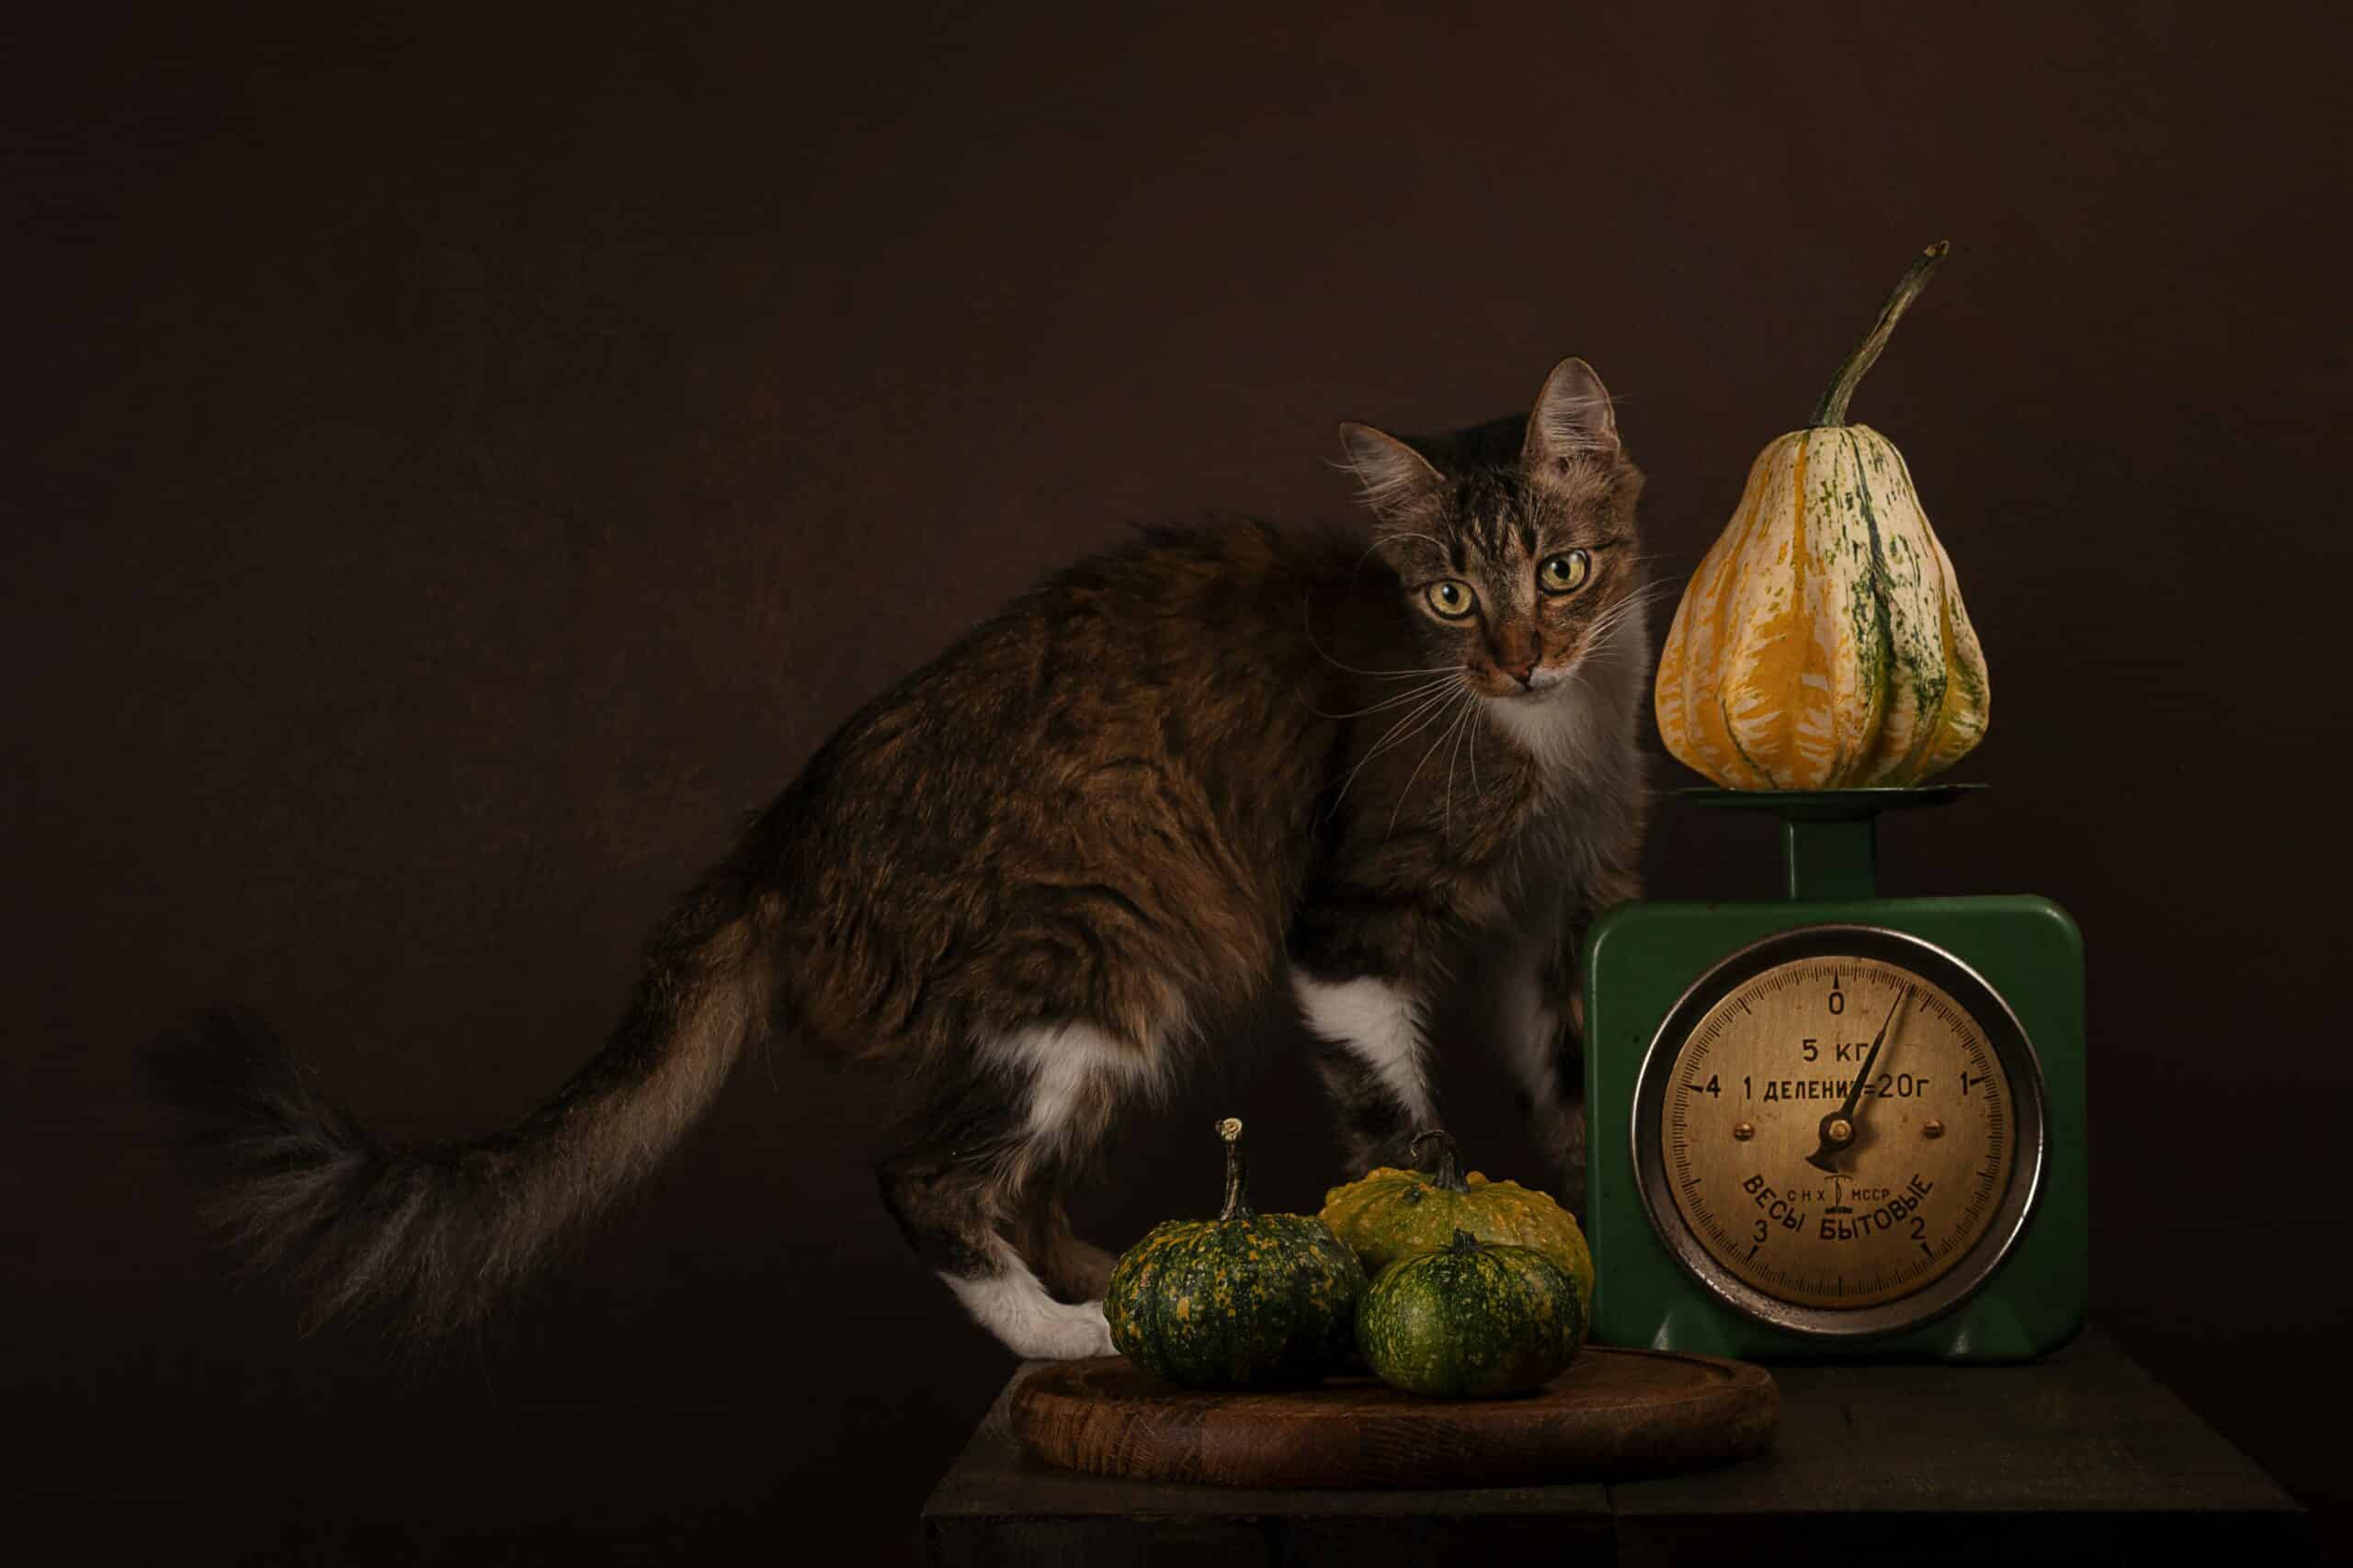 still life image from unsplash with cate and gourds